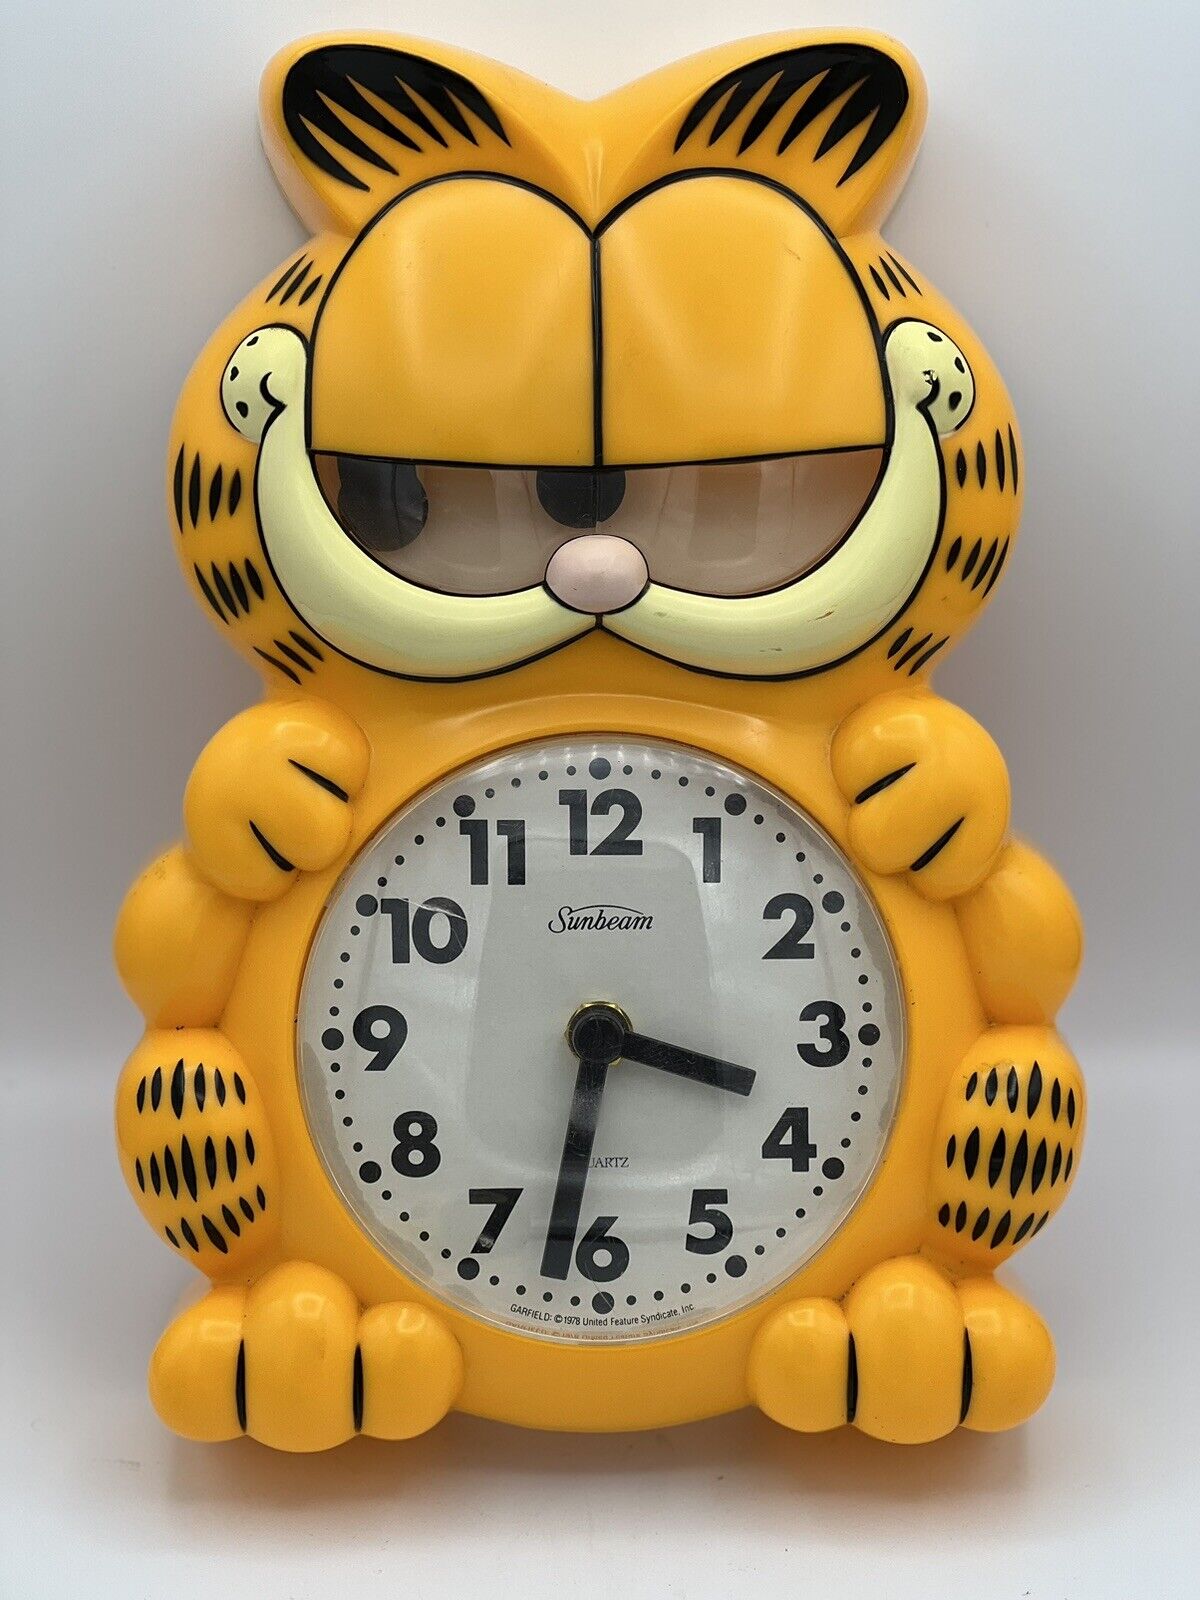 Vintage 1978 1981 Garfield The Cat Sunbeam wall clock. NOT WORKING Missing Tail